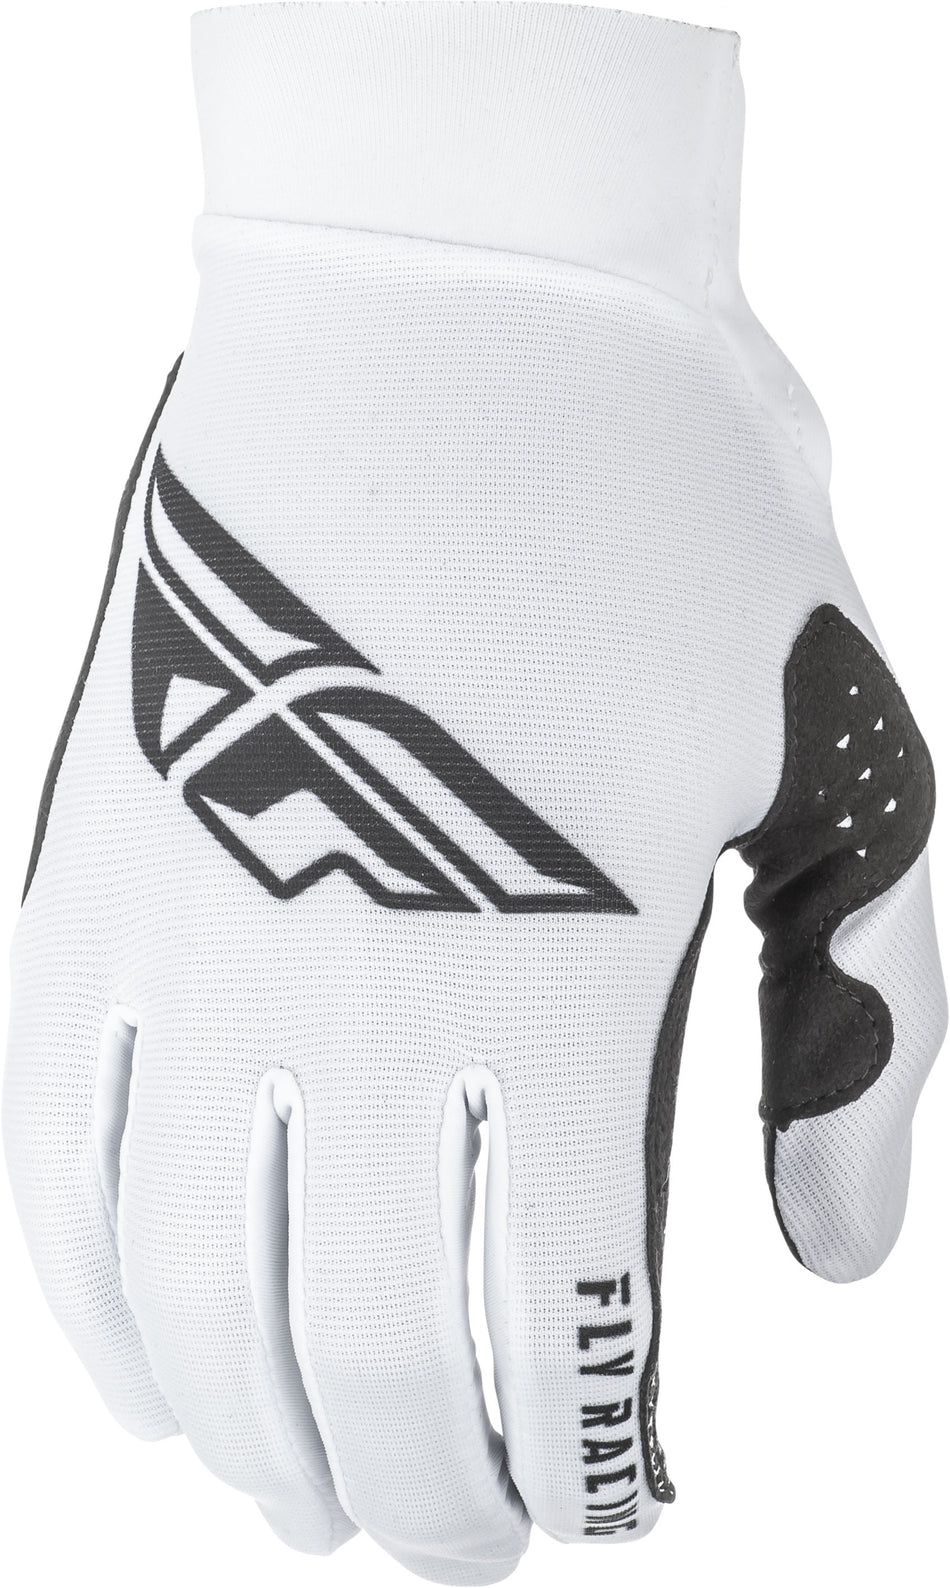 FLY RACING Pro Lite Gloves White Sz 07 372-81407